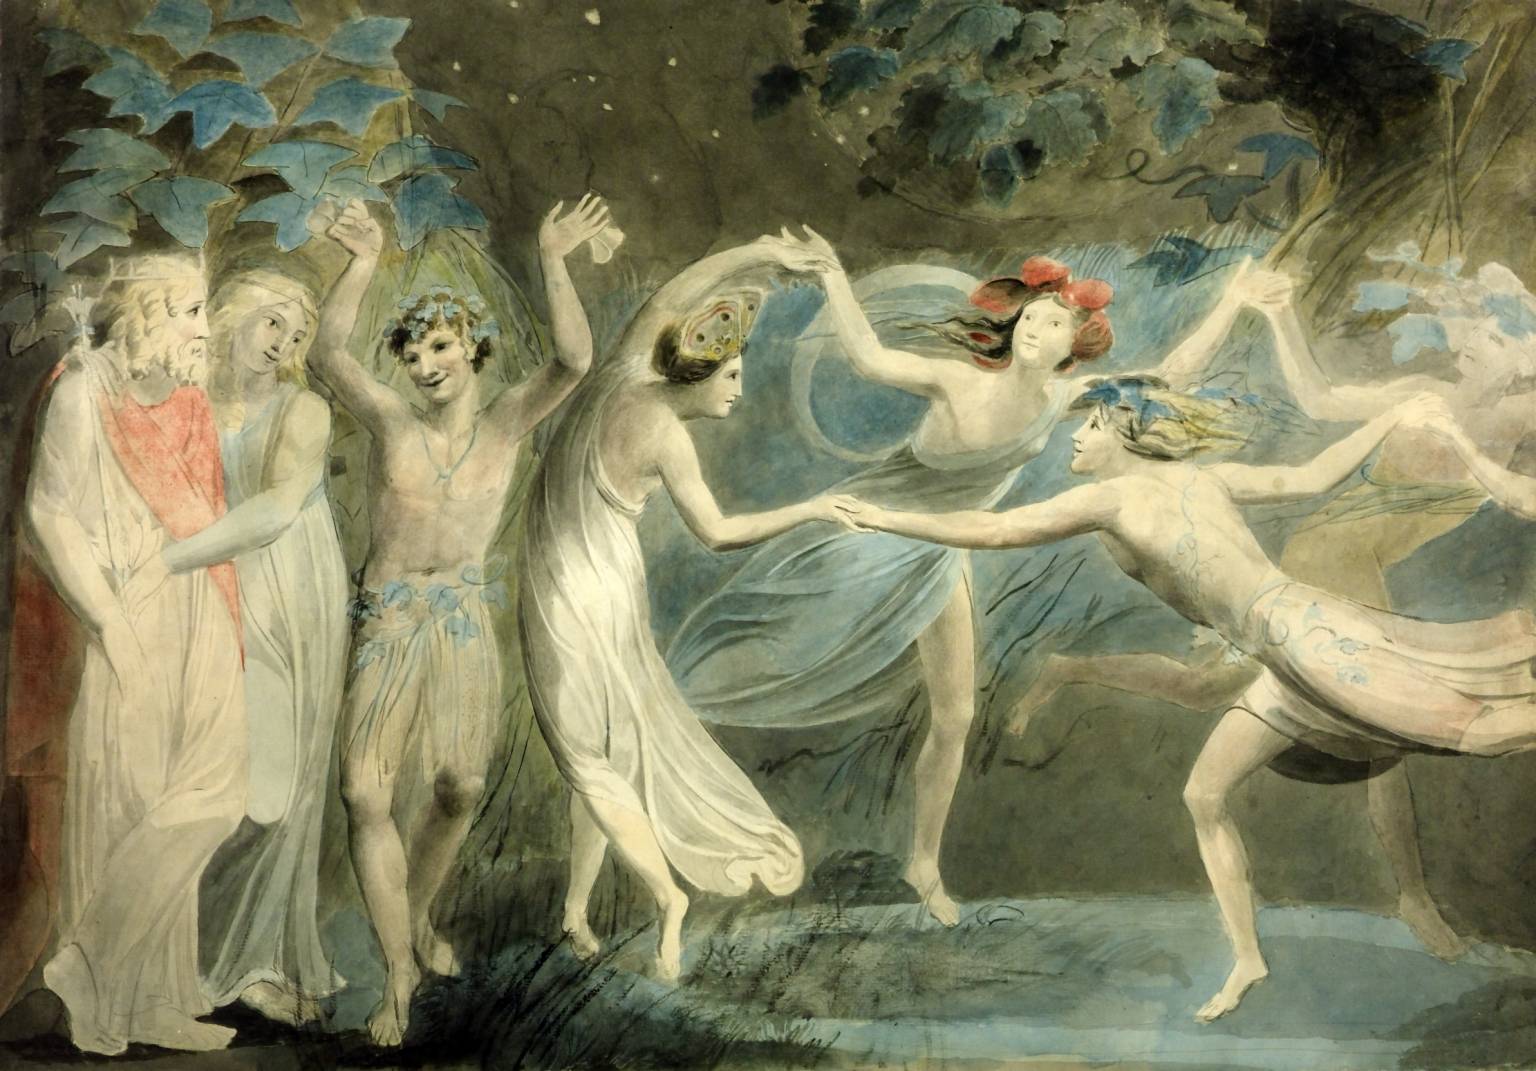 Oberon Titania and Puck with Fairies Dancing By William Blake 1786 Tate Museum the UK